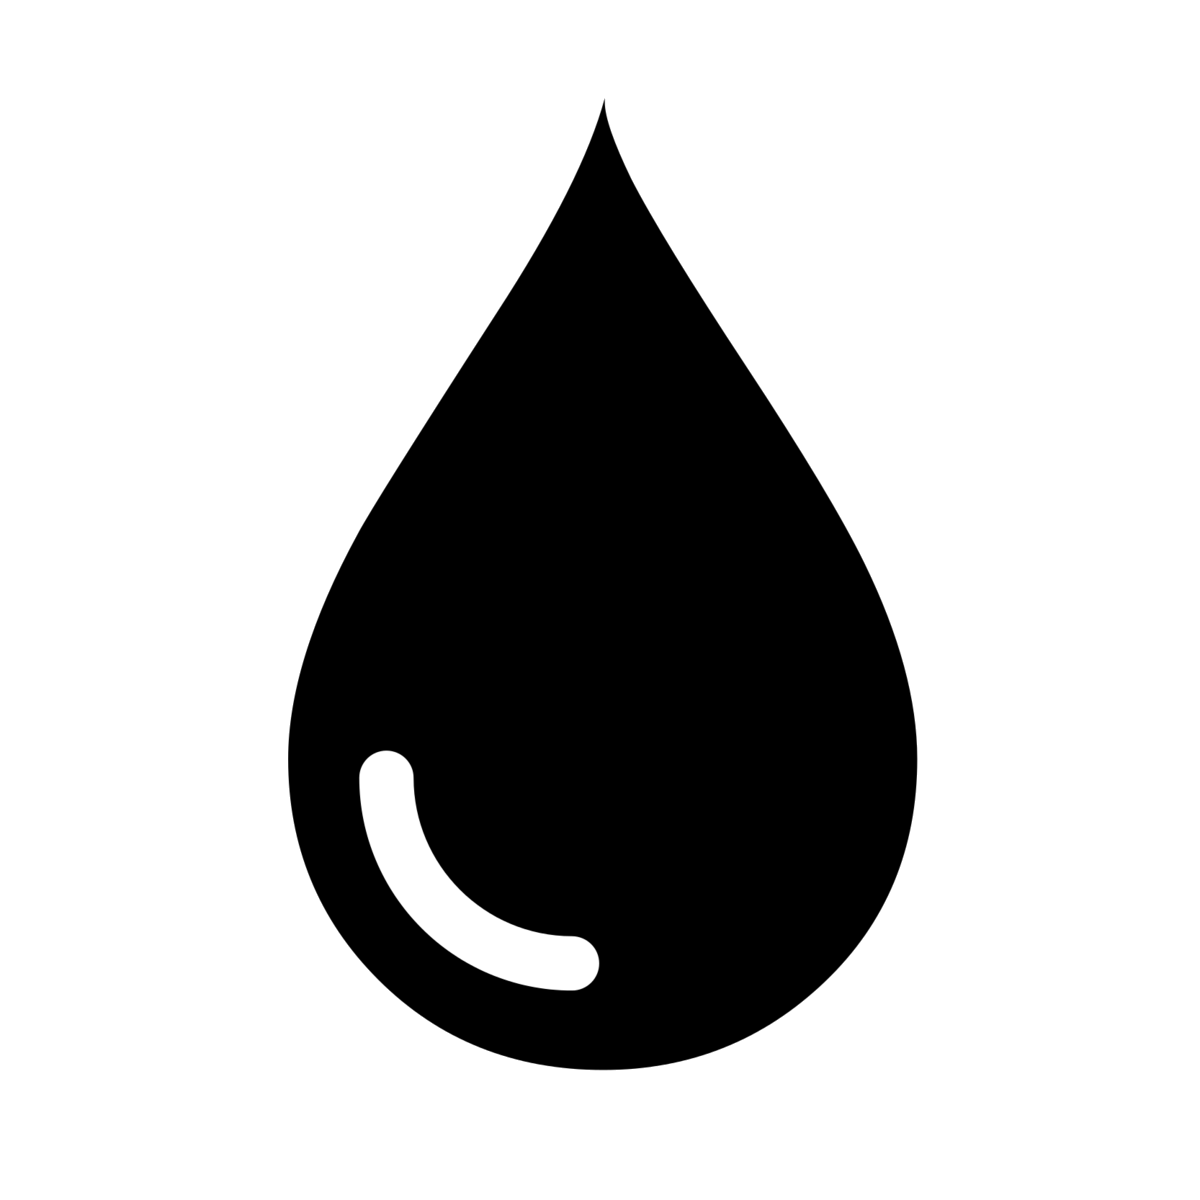 Water Drop Clipart Black And White Transparent Png